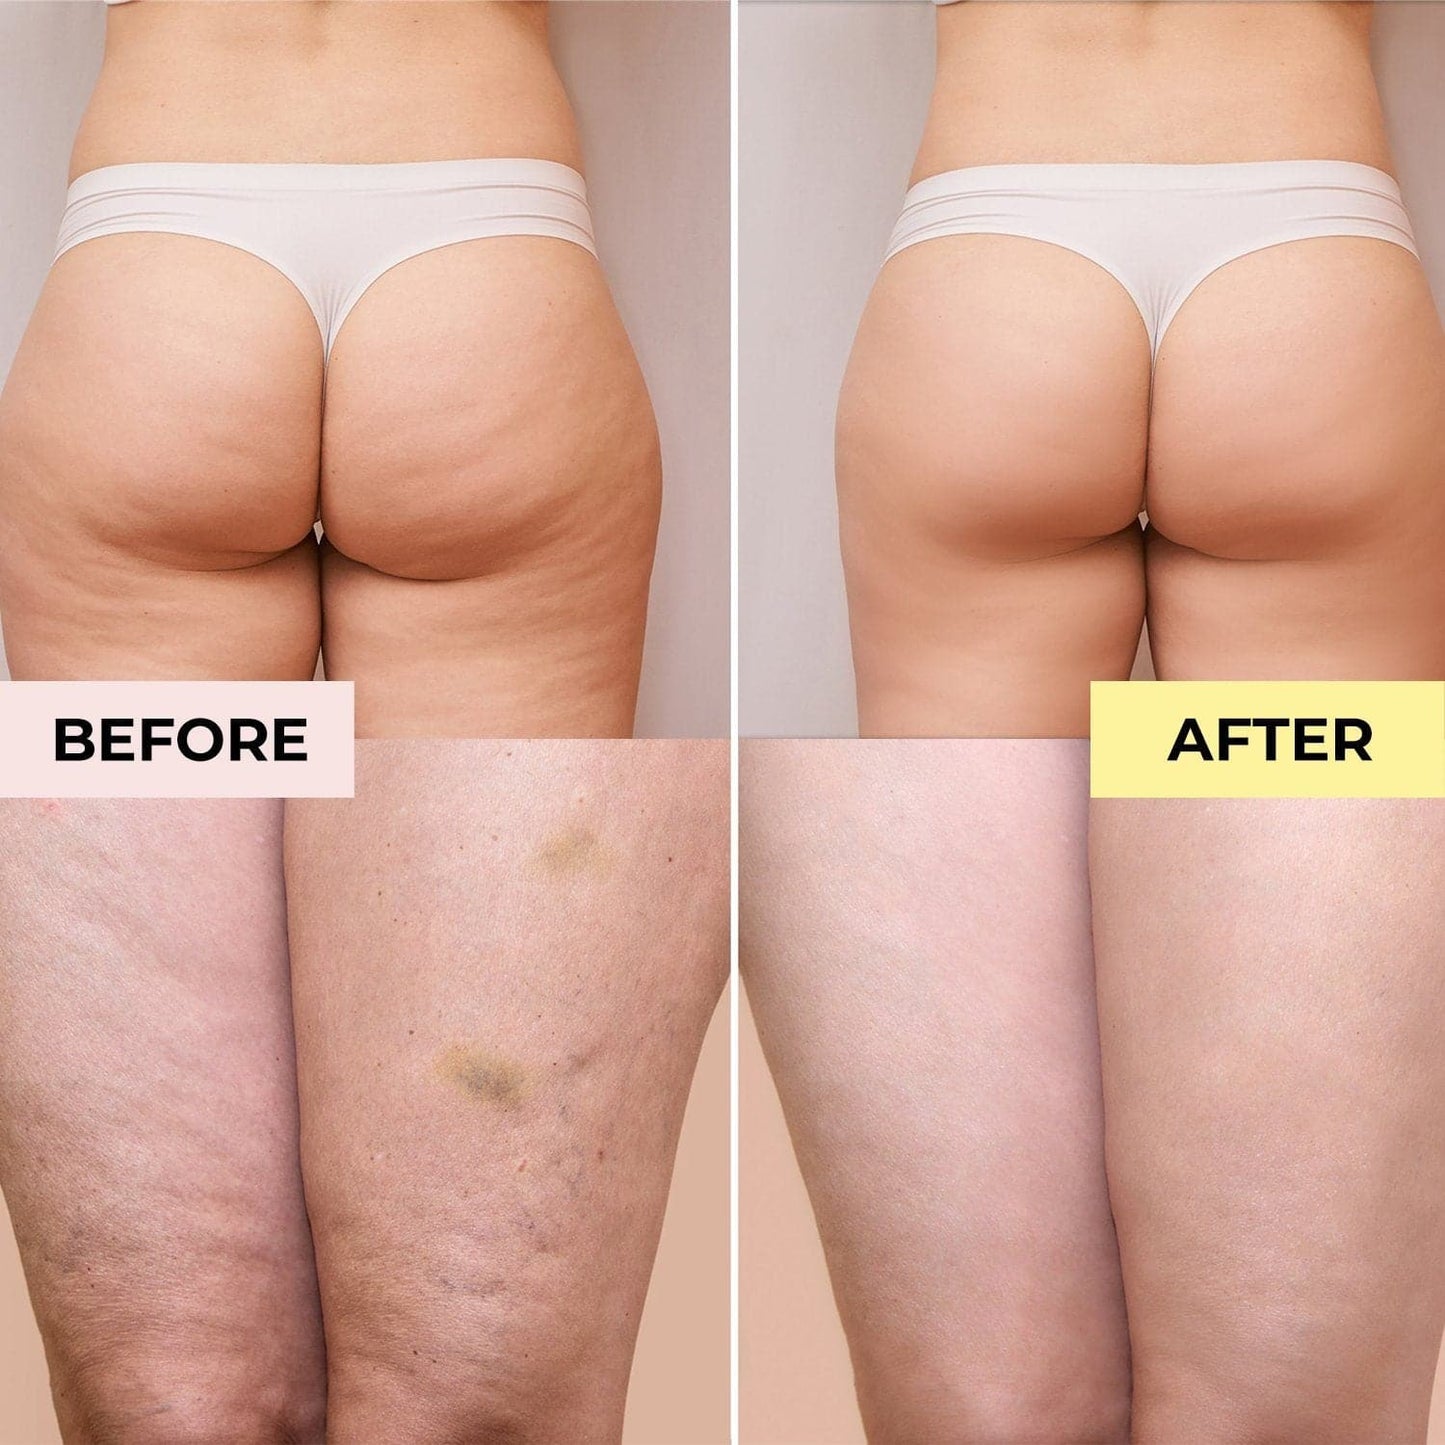 Life's Butter Before and After - Anti-Cellulite Treatment - The most effective anti-cellulite products